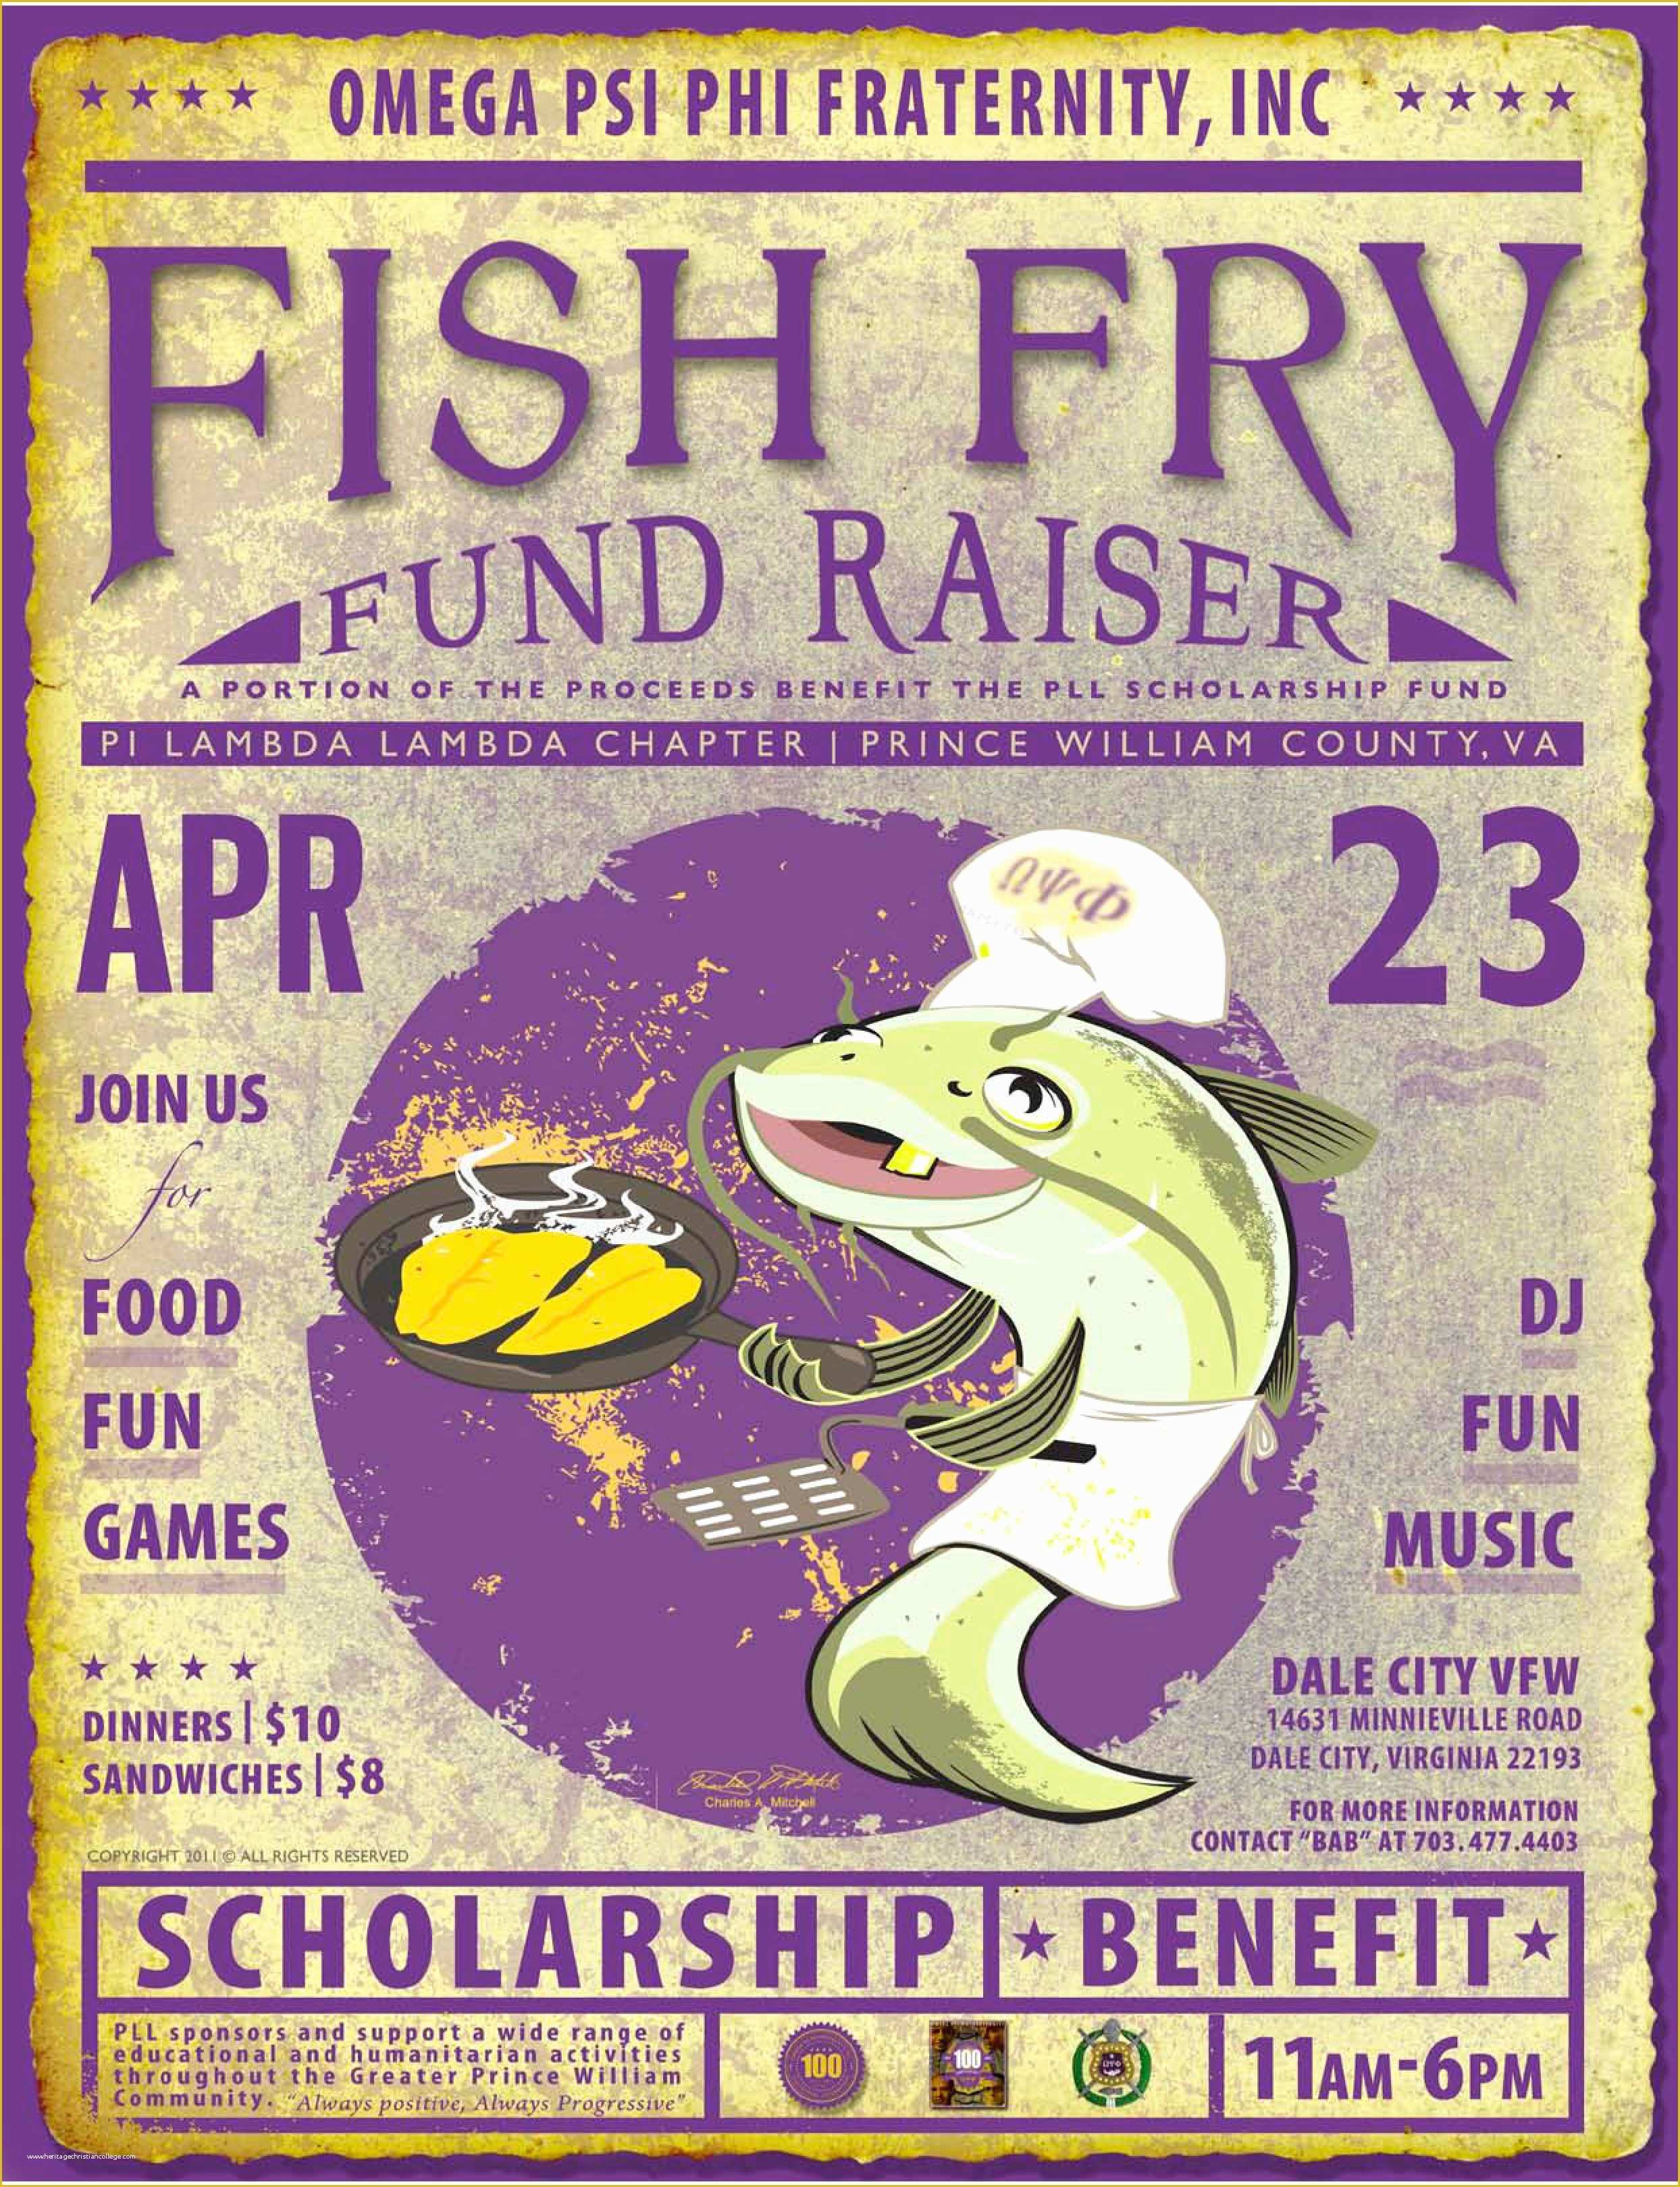 Free Fish Fry Flyer Template Of Great Poster for A Fish Fry Fundraising